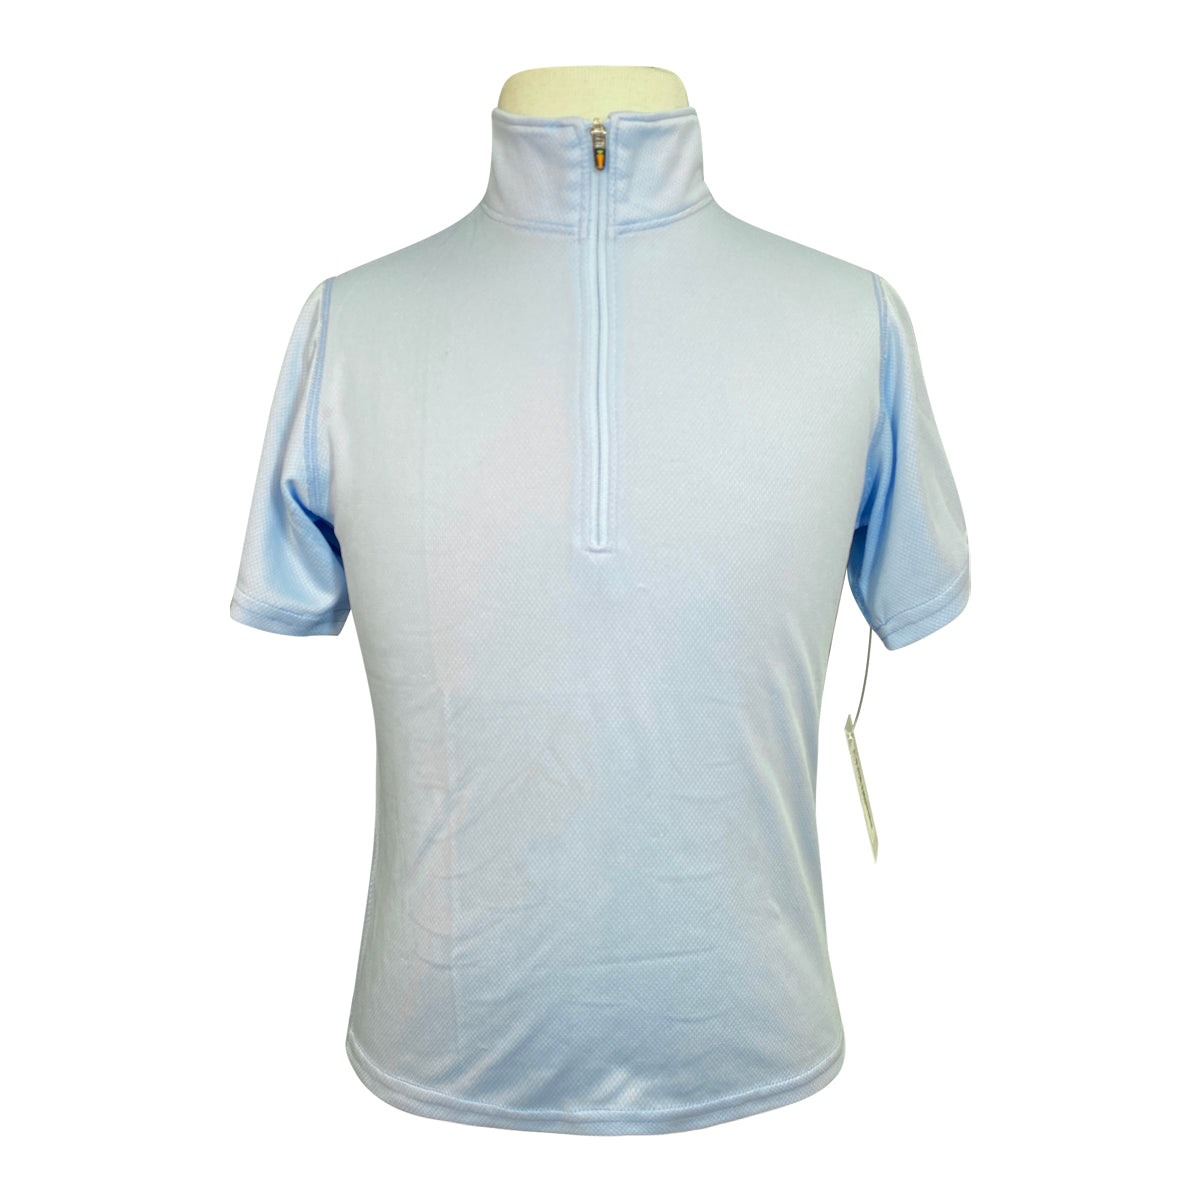 Kerrits 'Aire Ice Fil' Shirt in Light Blue